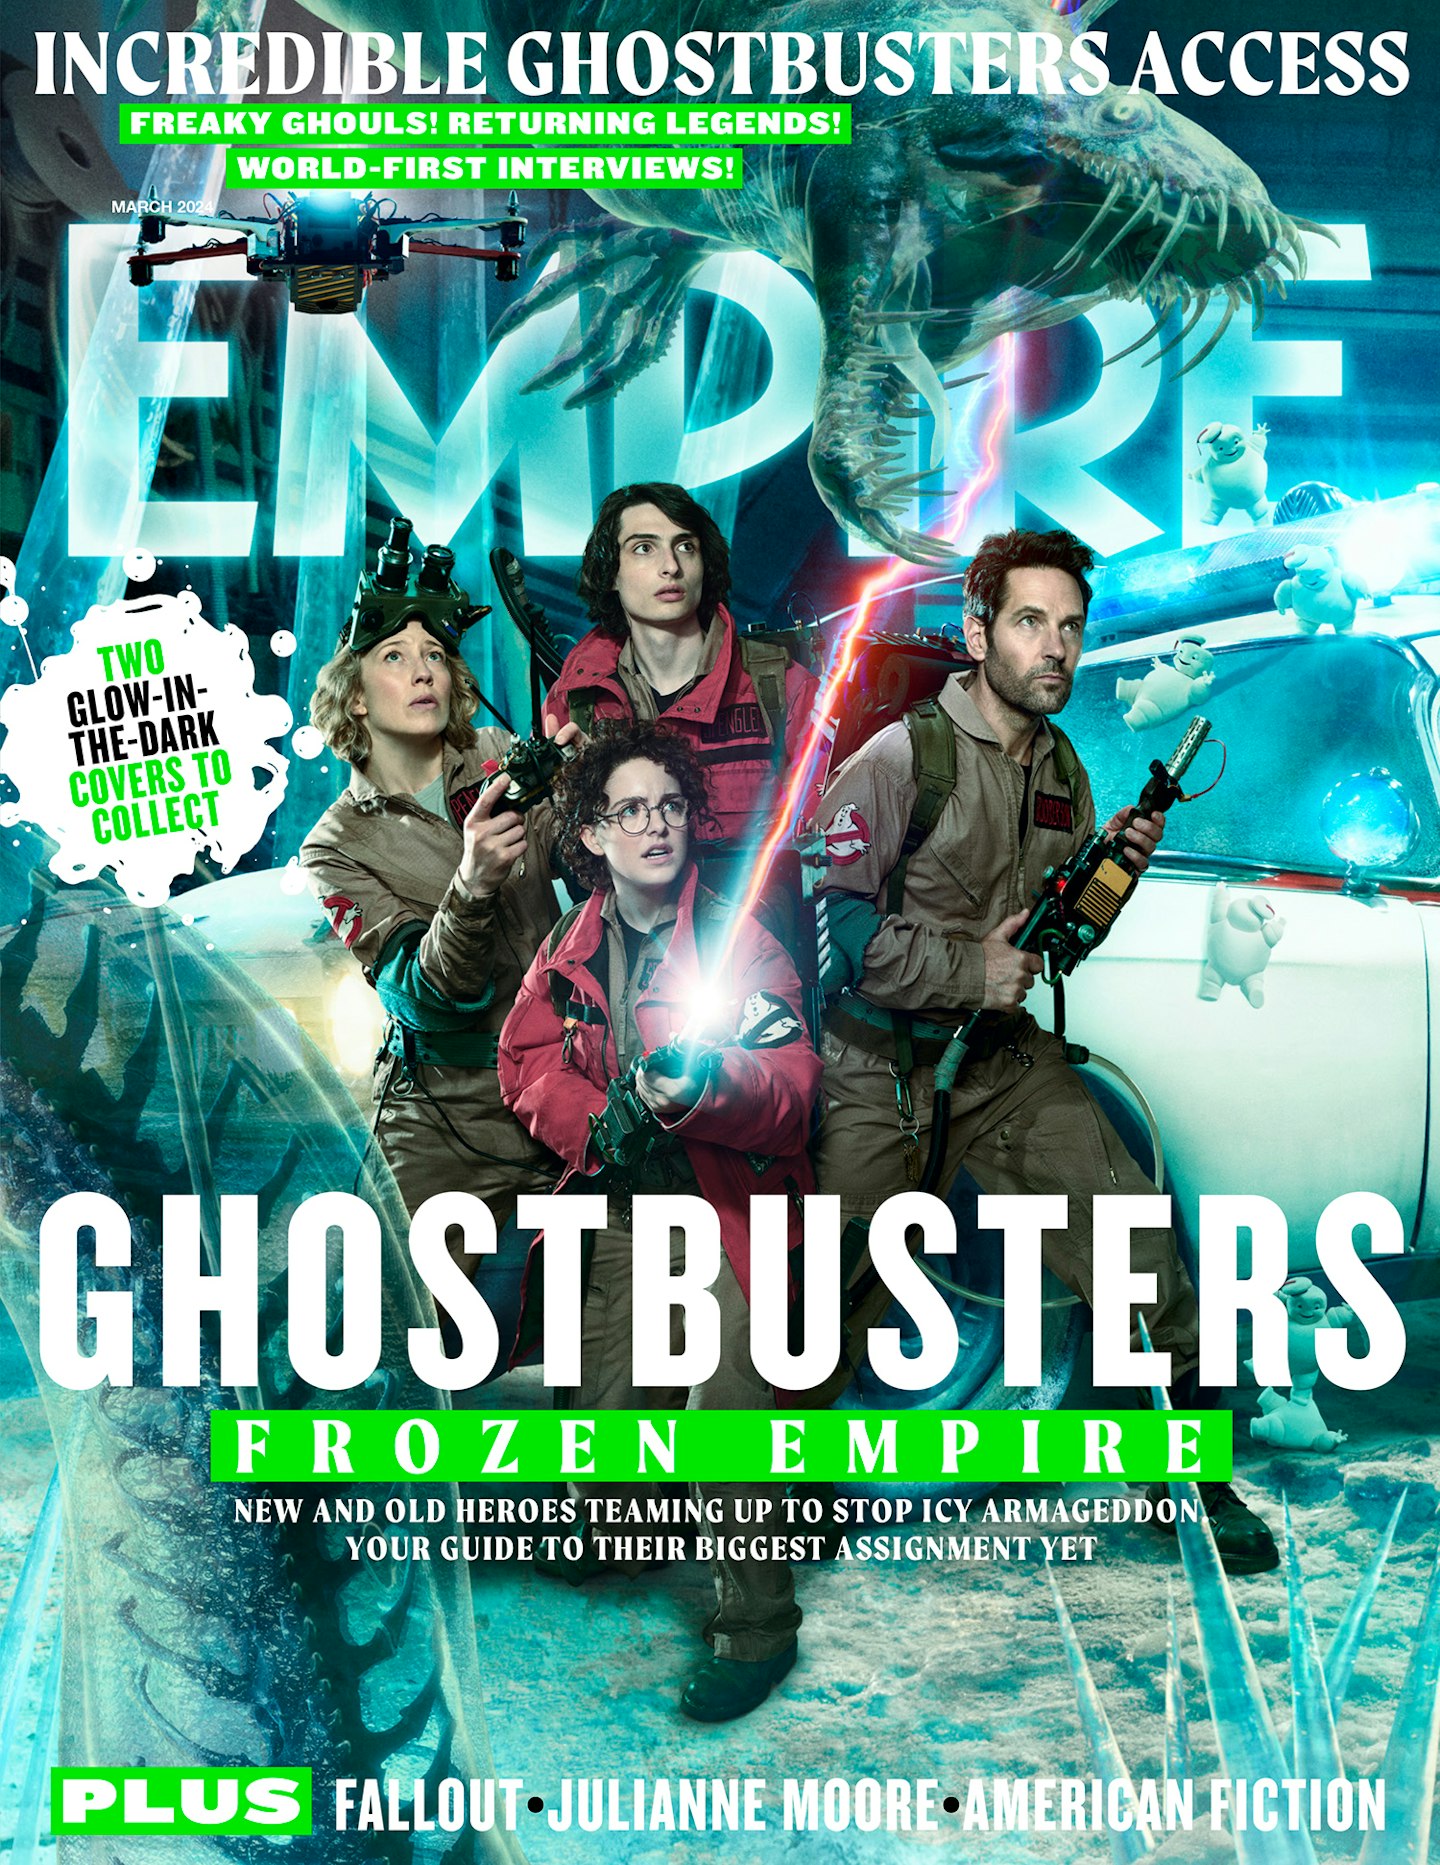 Empire’s Ghostbusters Frozen Empire WorldExclusive Covers Revealed